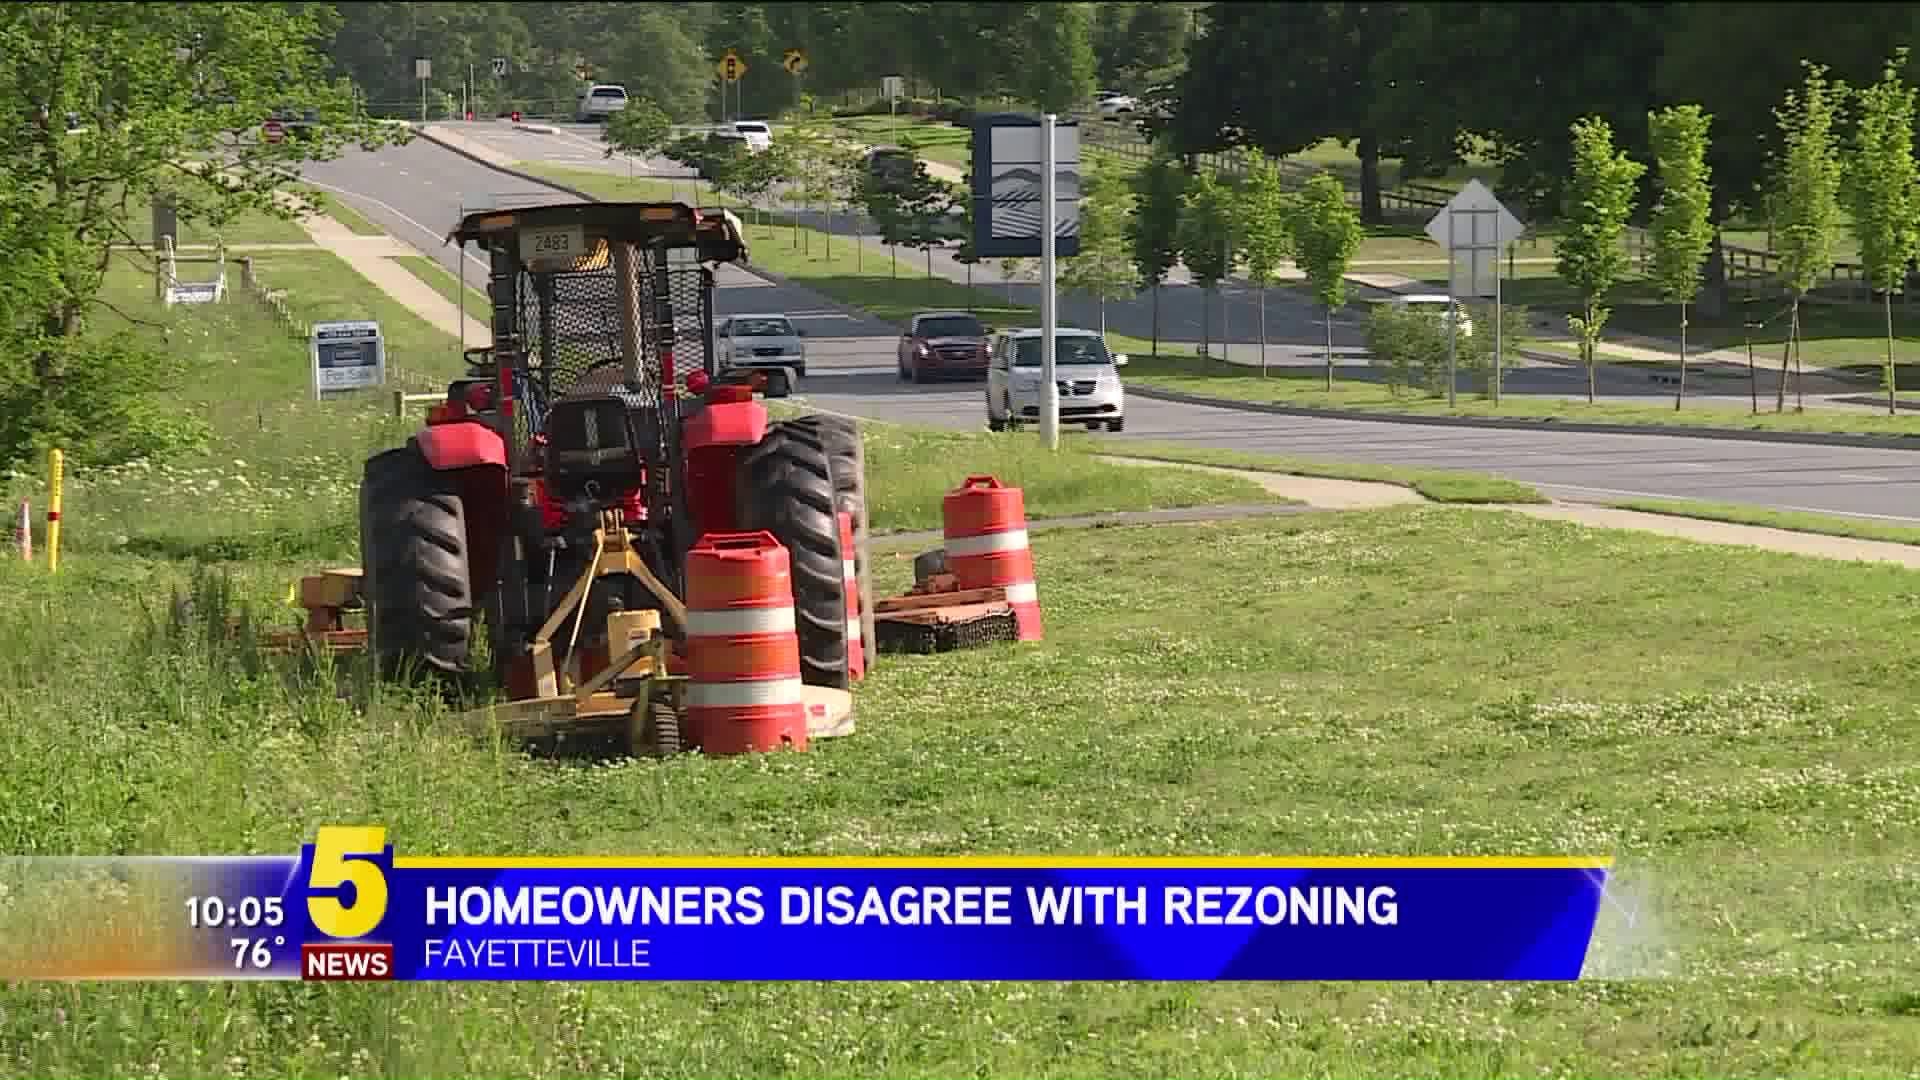 Homeowners Disagree With Rezoning